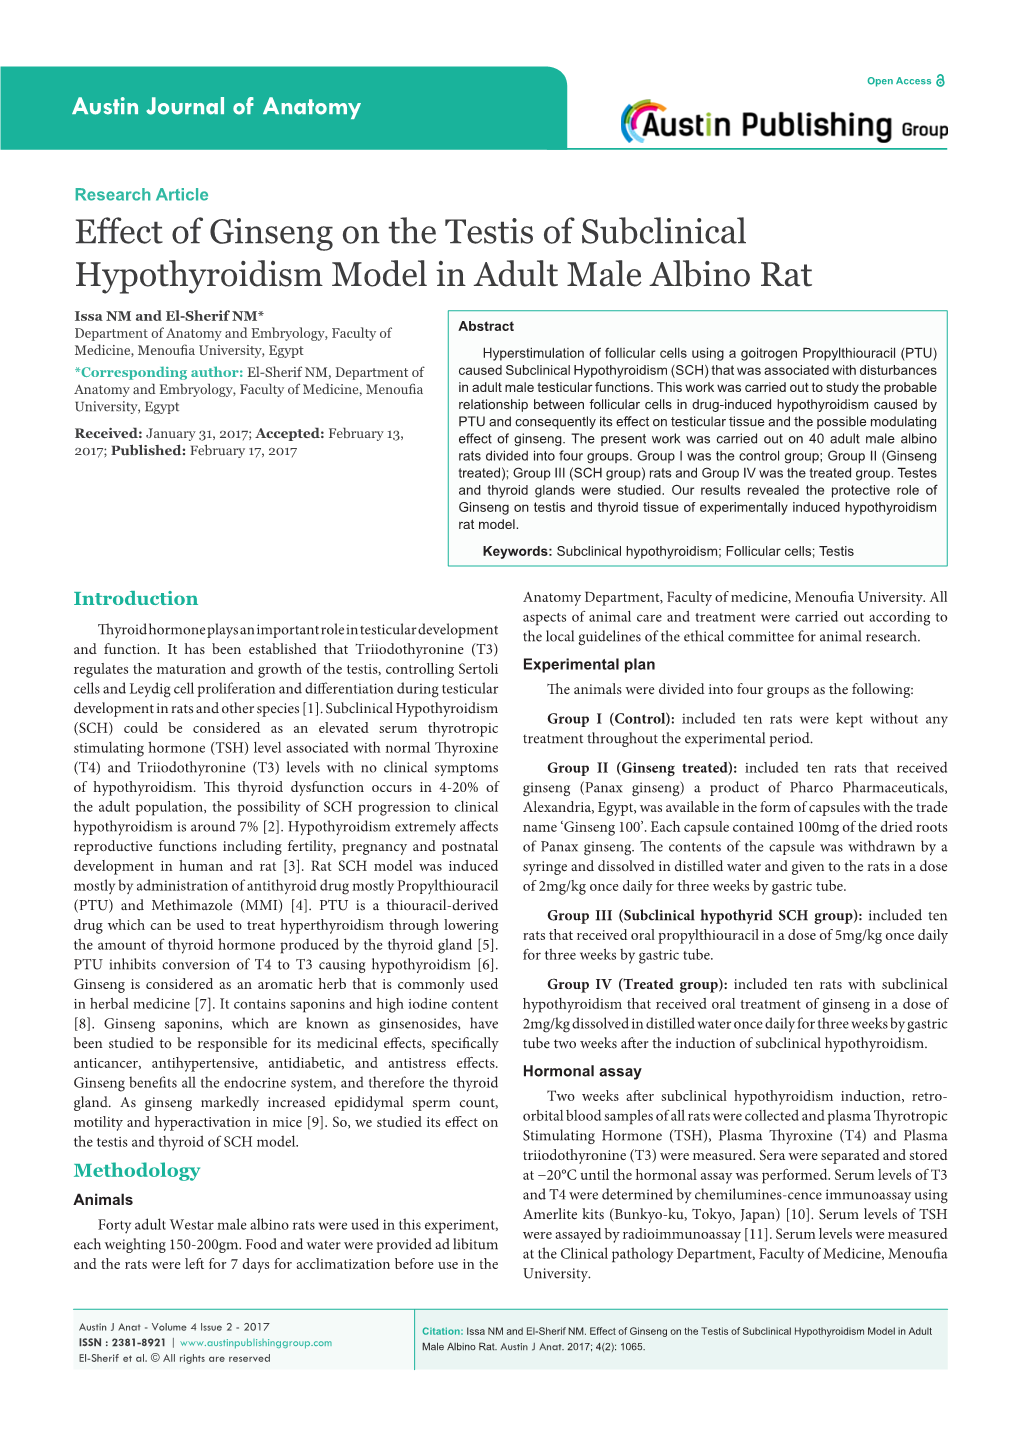 Effect of Ginseng on the Testis of Subclinical Hypothyroidism Model in Adult Male Albino Rat